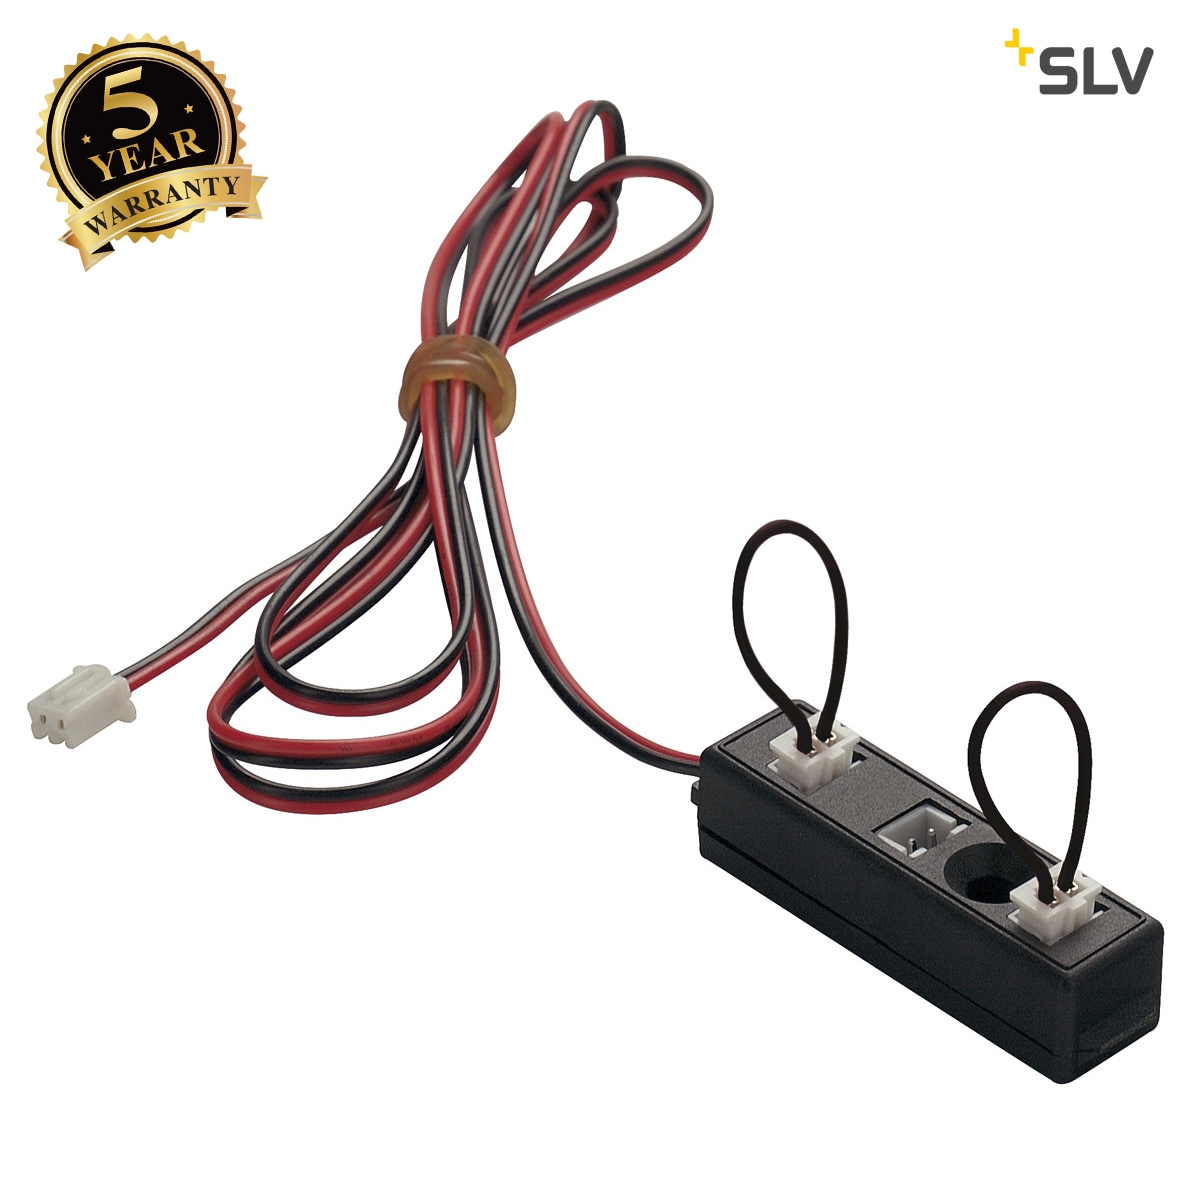 SLV MULTIWAY CONNECTOR, 3 outlets with two bridges, black, max. 350mA 111850